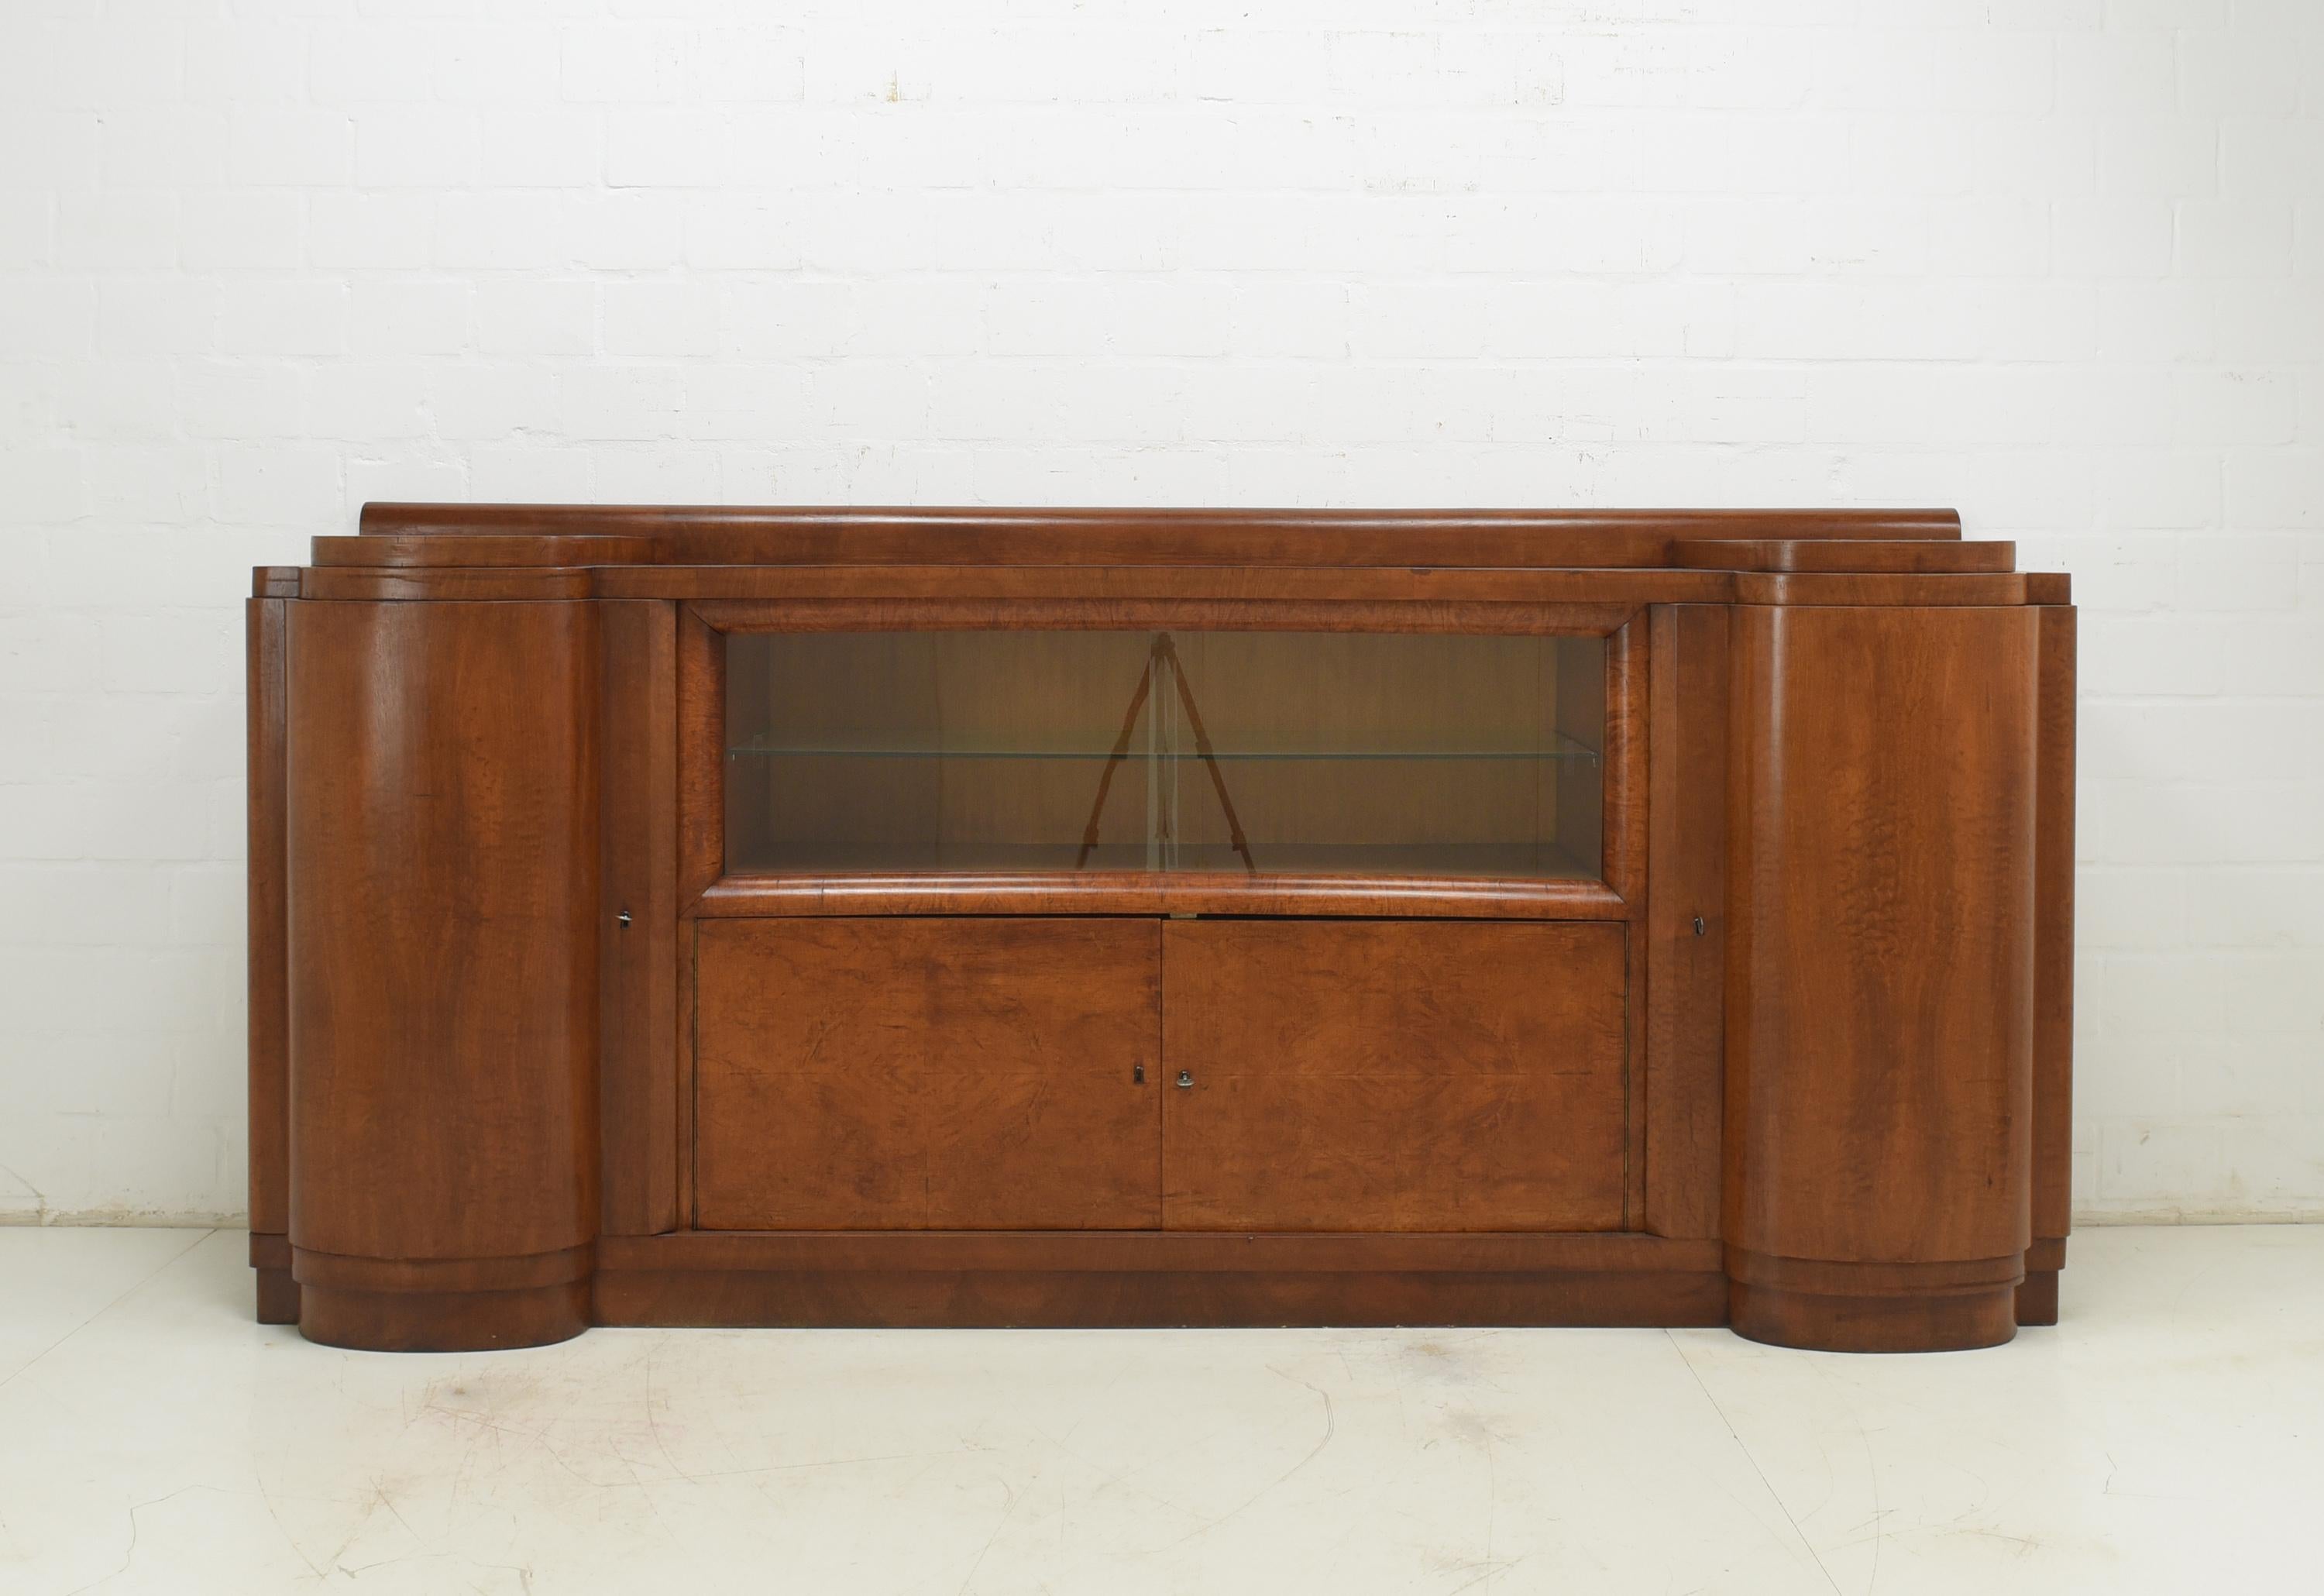 XXL sideboard restored Art Deco around 1930 walnut showcase large

Features:
Tiered, four-door model with sliding glass doors and interior drawers
High quality
Great art deco design
Beautiful patina and grain
Original rod locks
Exceptional,